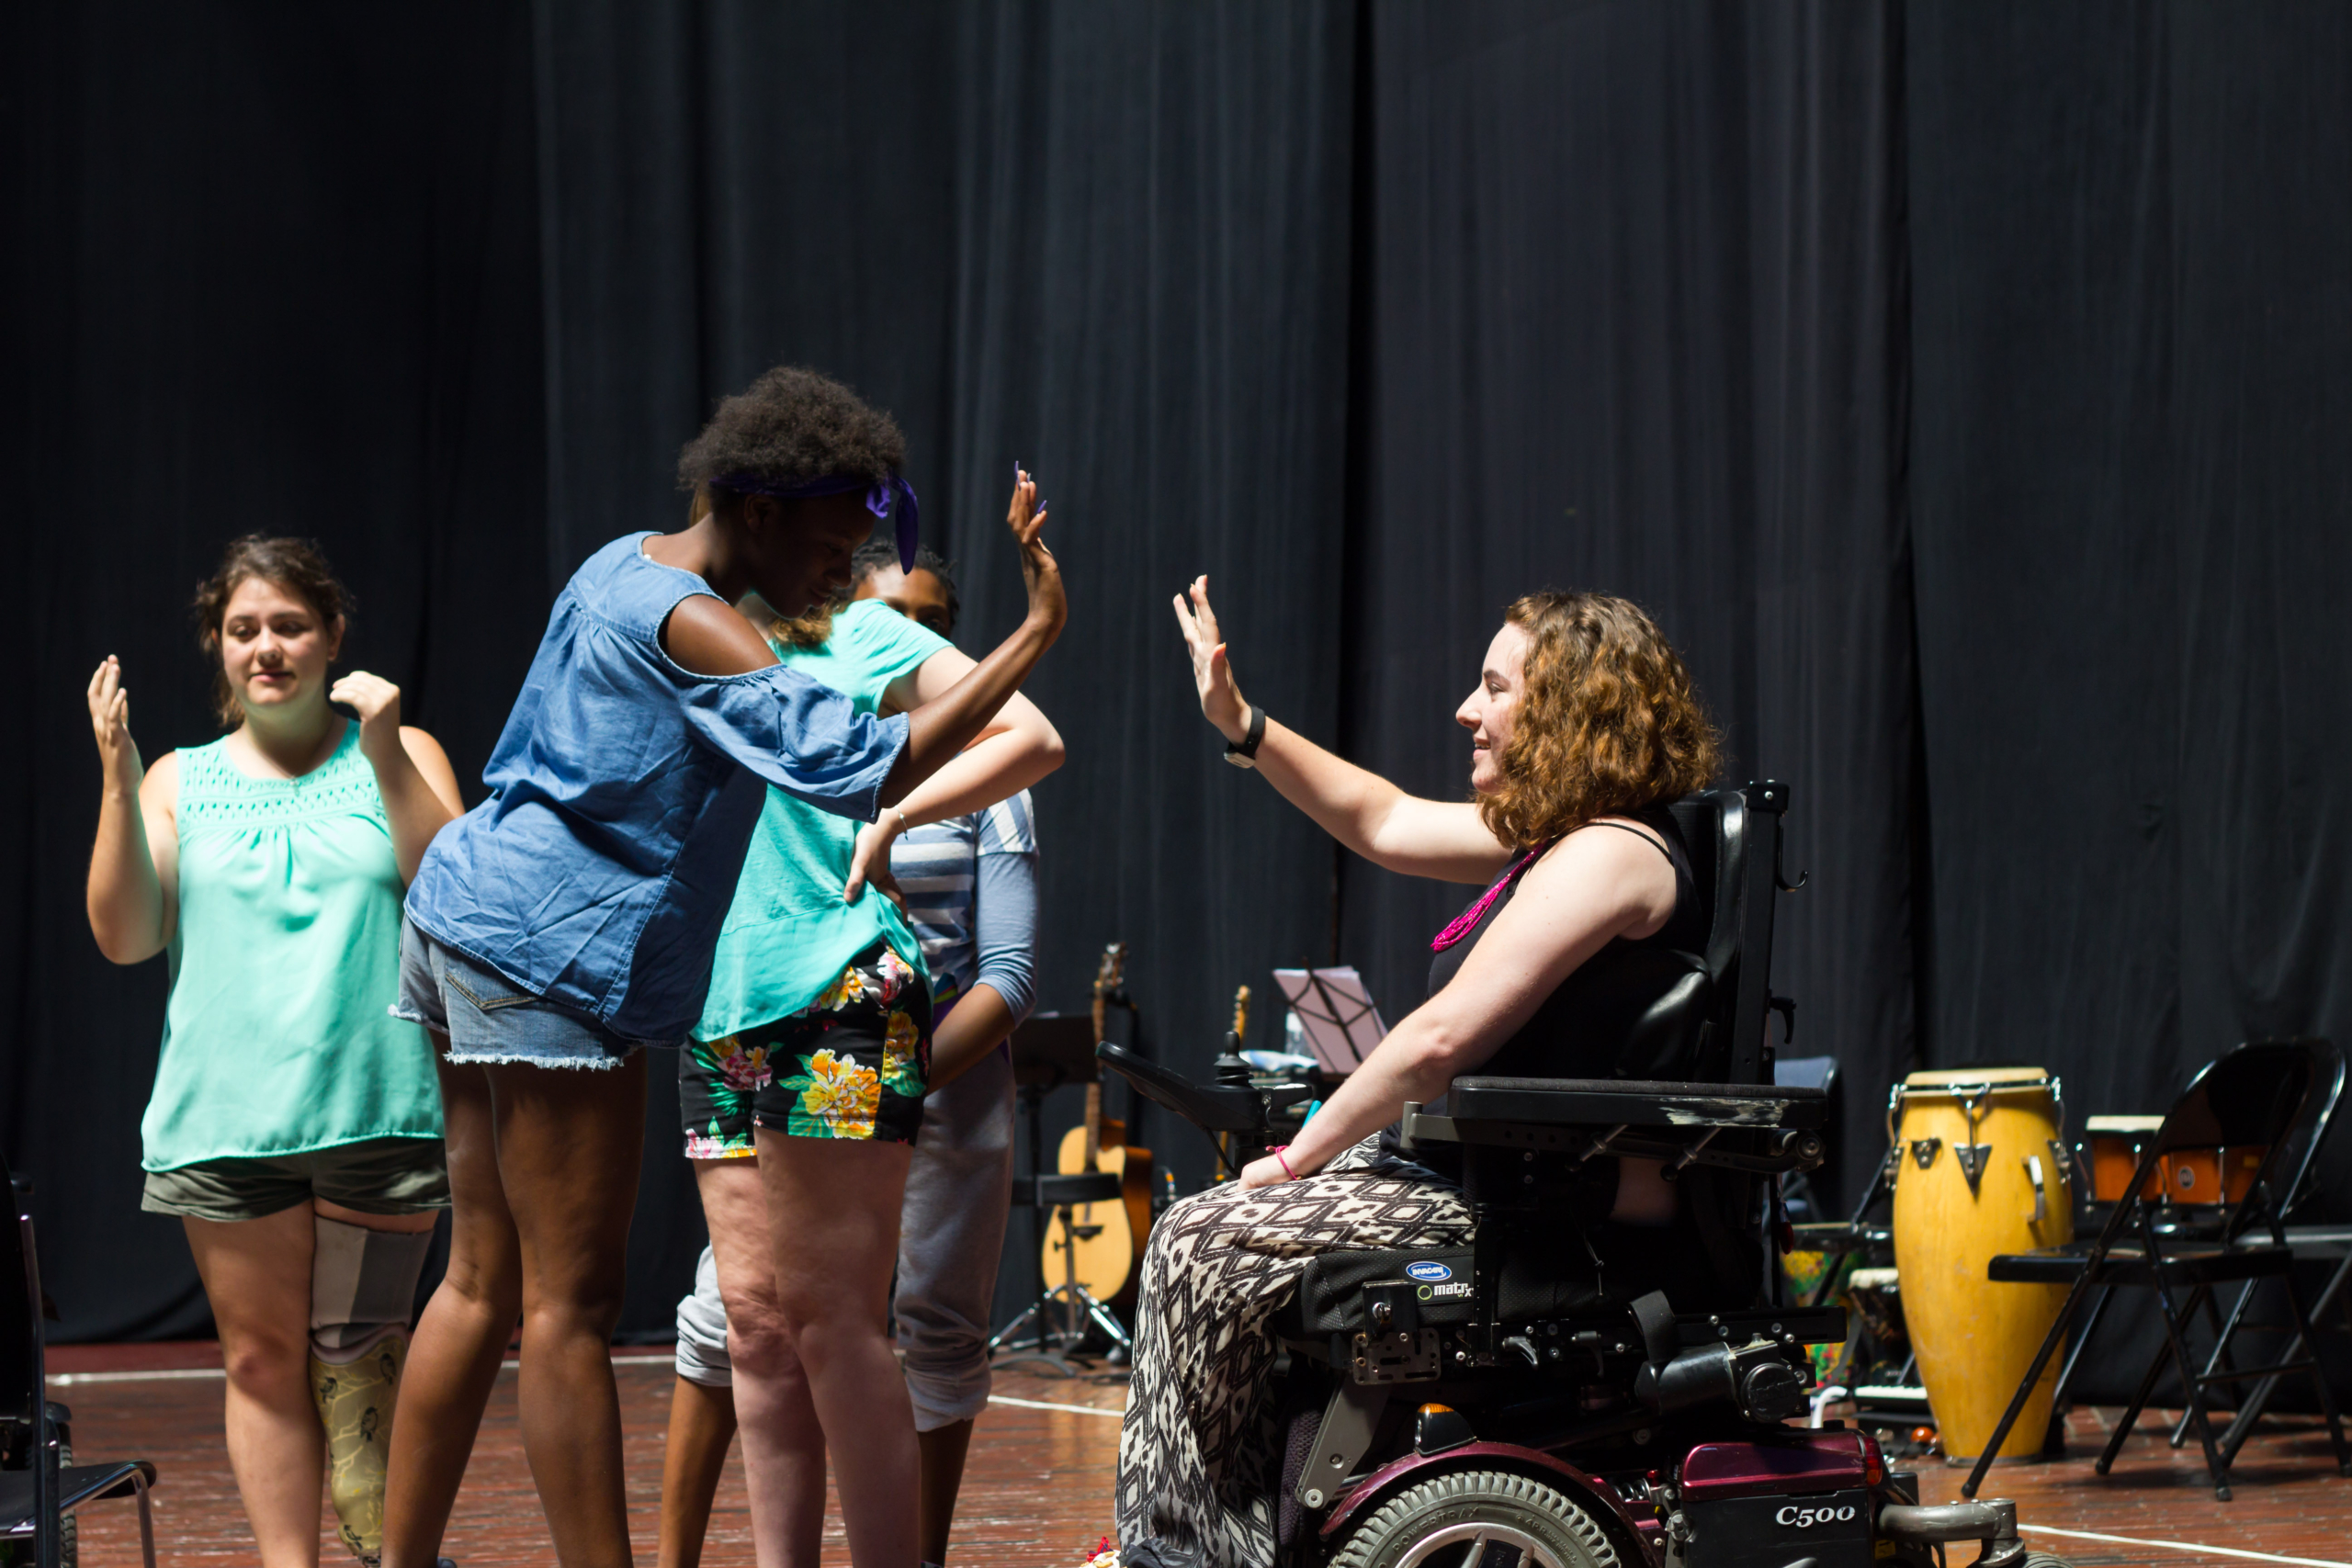 A young black woman and a young white woman in a wheelchair giving each other a high five